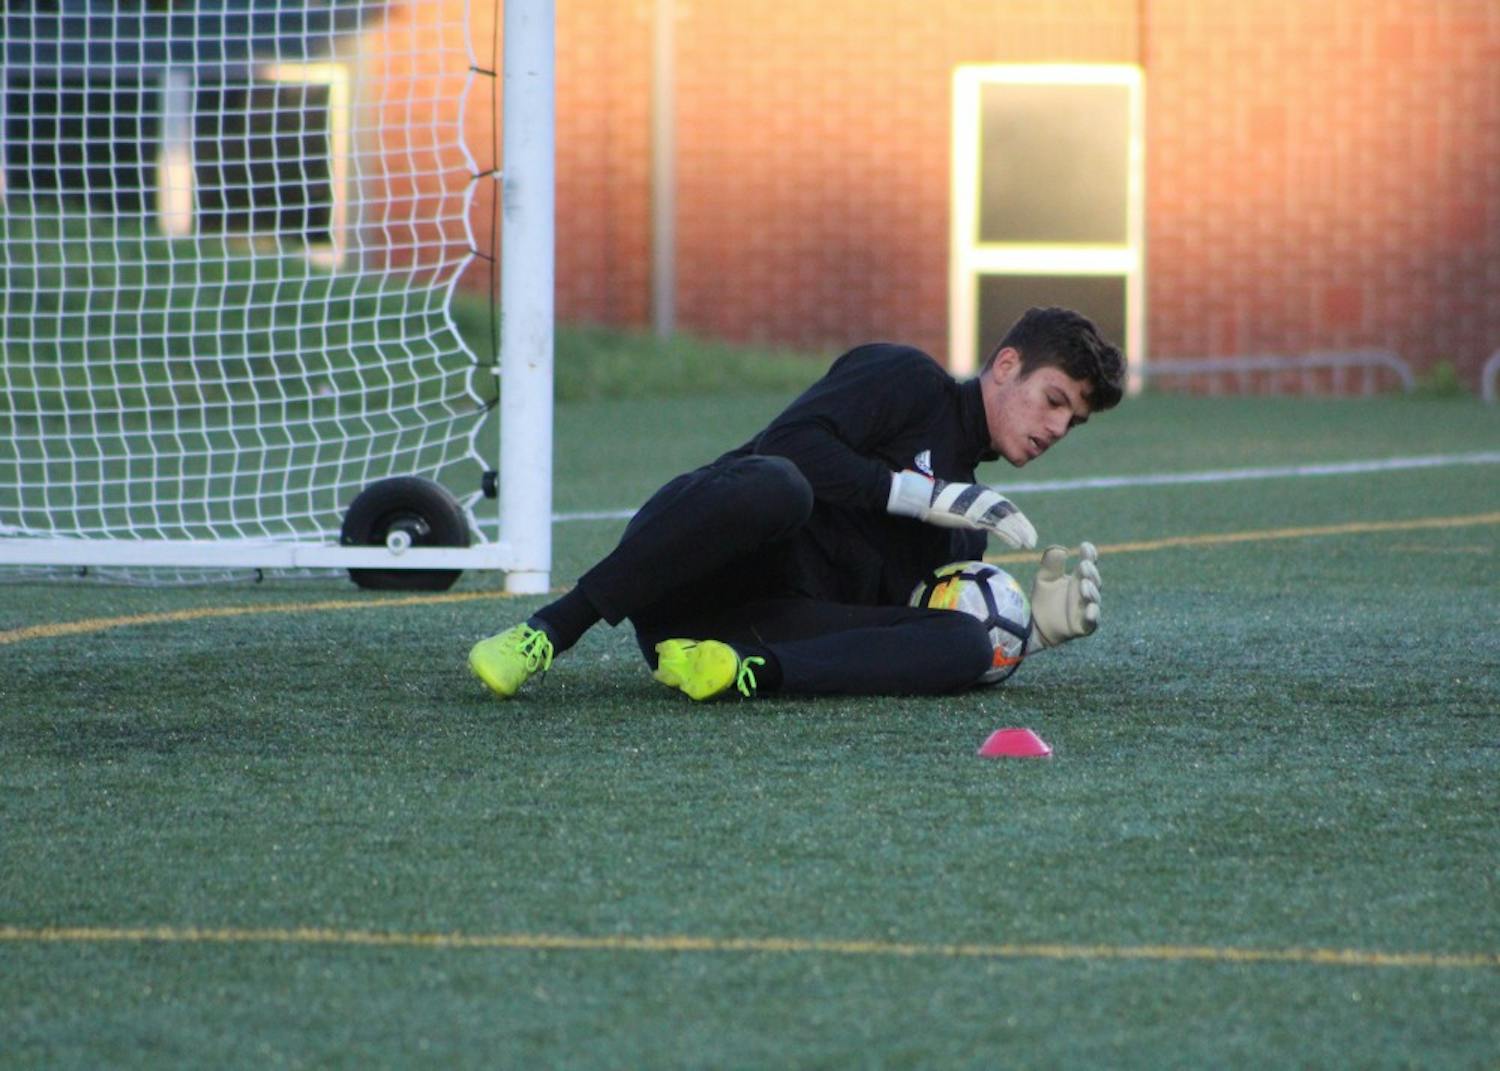 Freshman goalkeeper Trey Muse saves a shot during warm-ups before IU’s match against the Butler Bulldogs Oct. 18 in Indianapolis. Muse allowed no goals during the IU Credit Union/Adidas Classic.&nbsp;